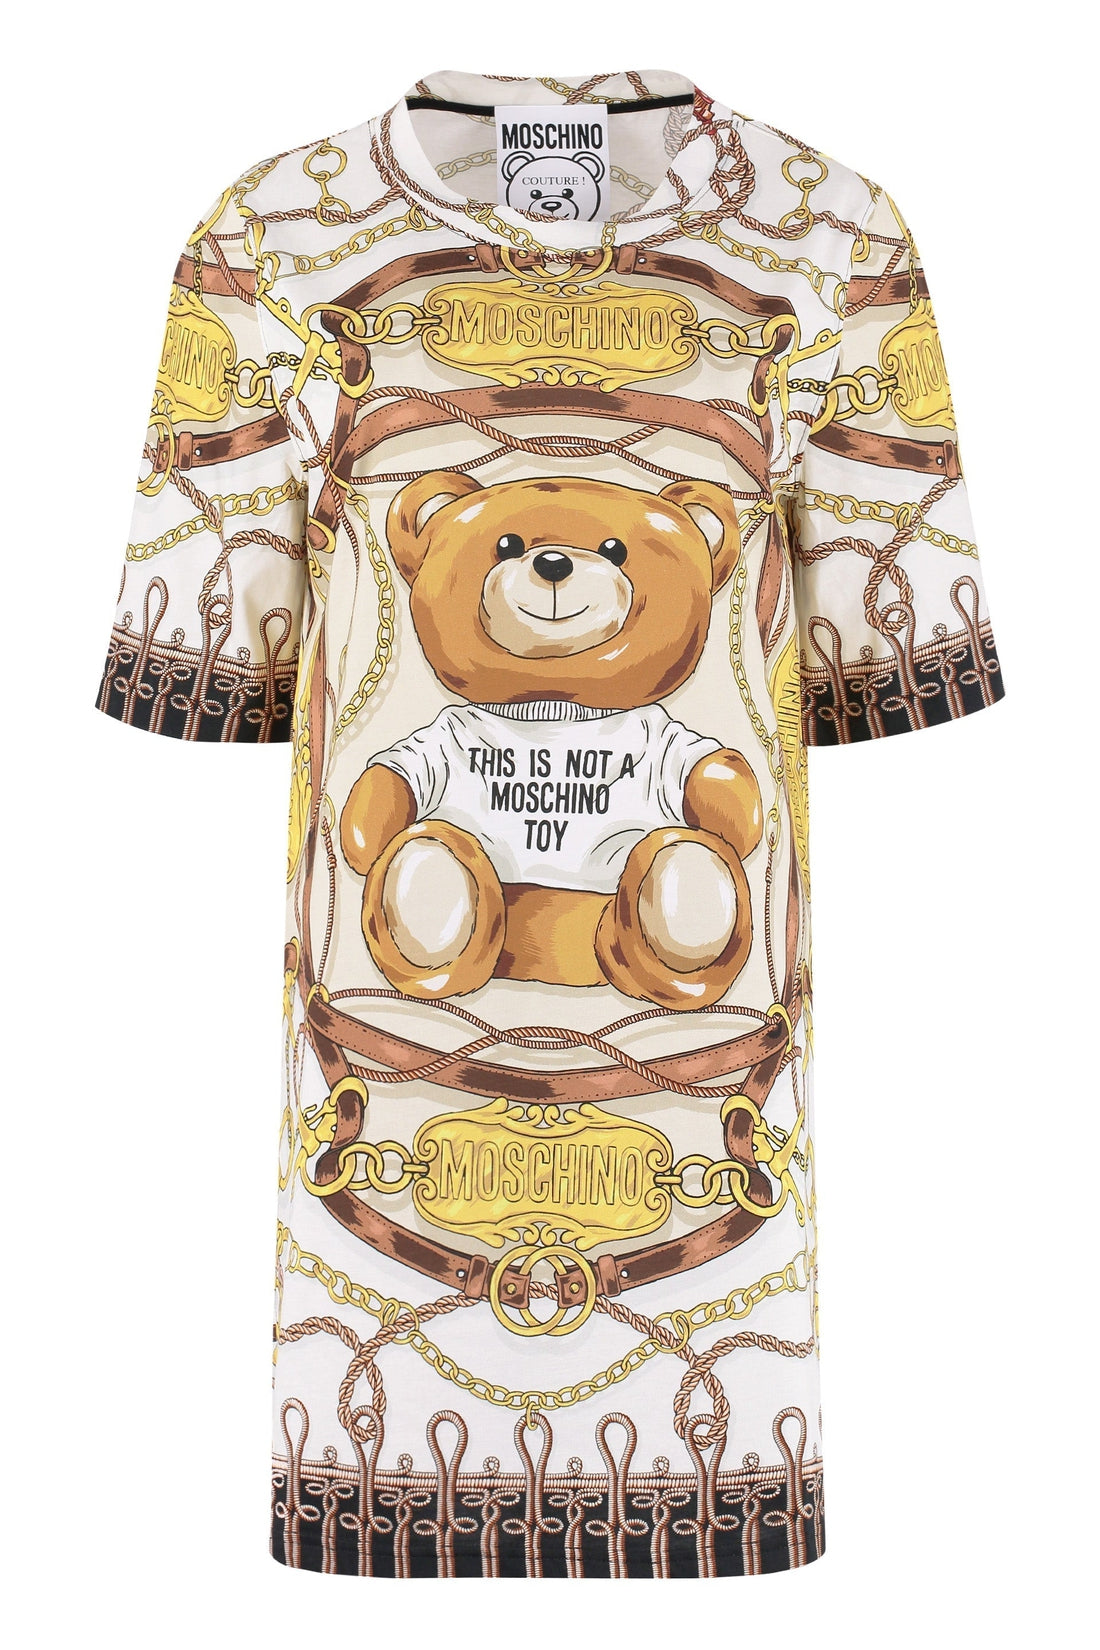 Moschino-OUTLET-SALE-Jersey mini dress-ARCHIVIST